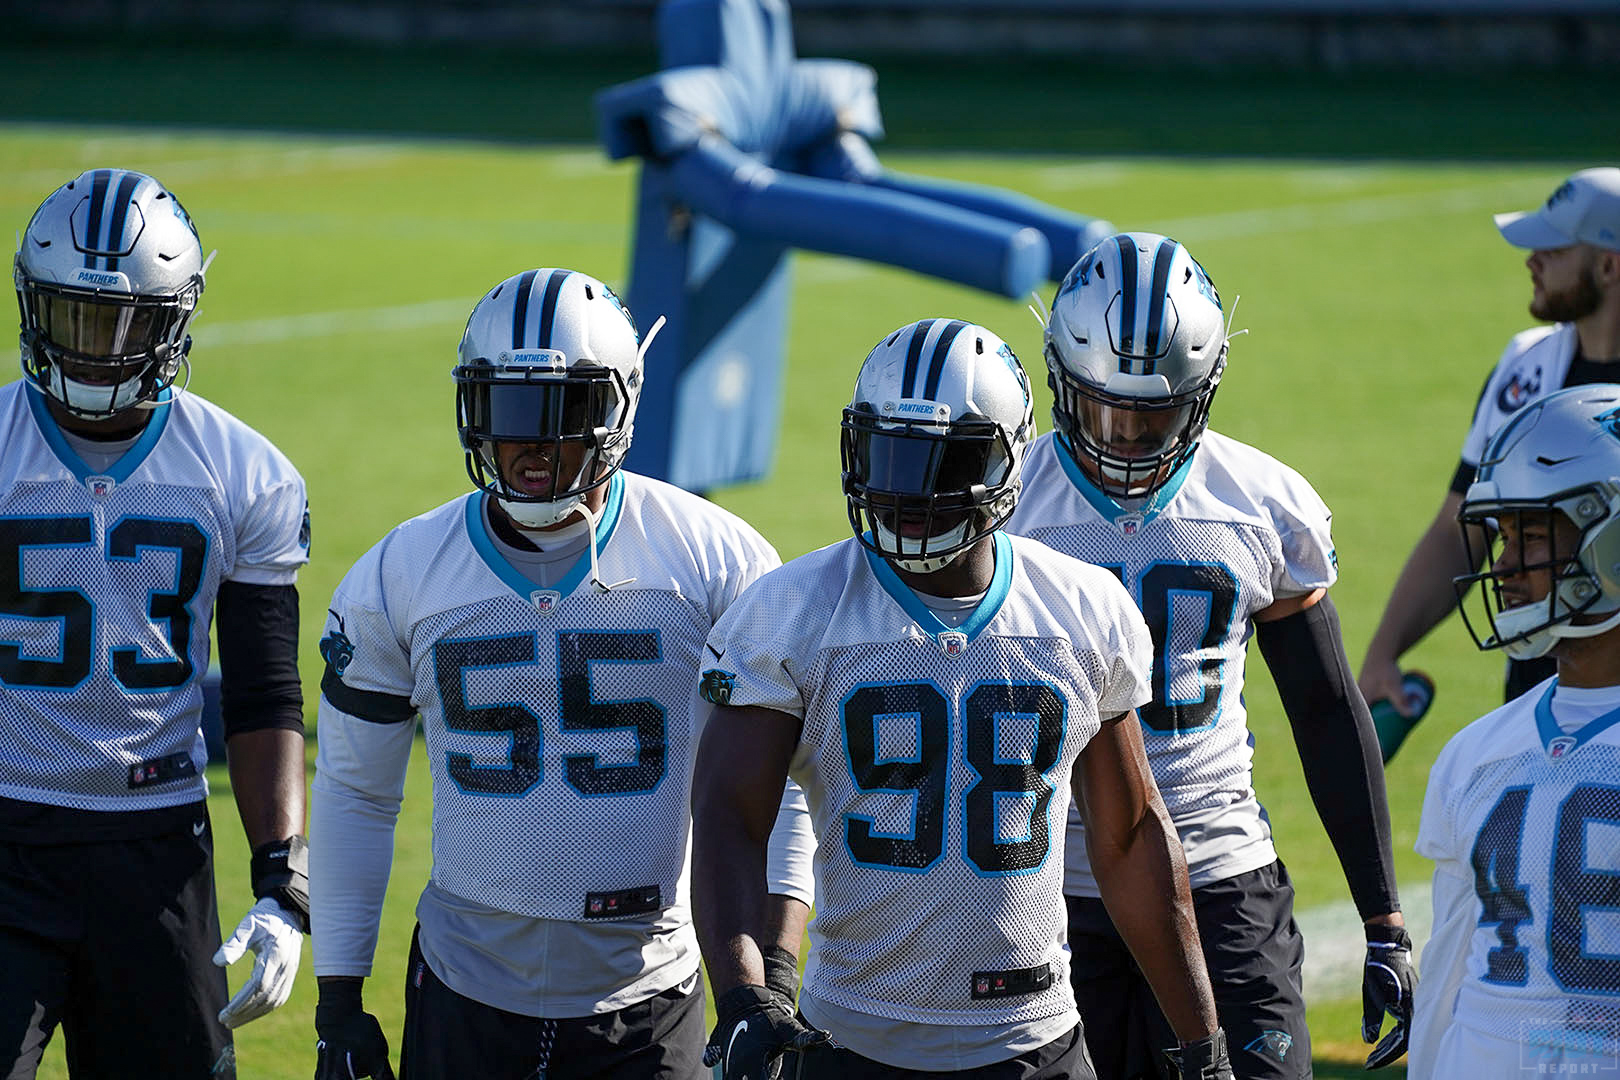 Pick Your Poison: How Bruce Irvin Is Helping Transform the Panthers Defense